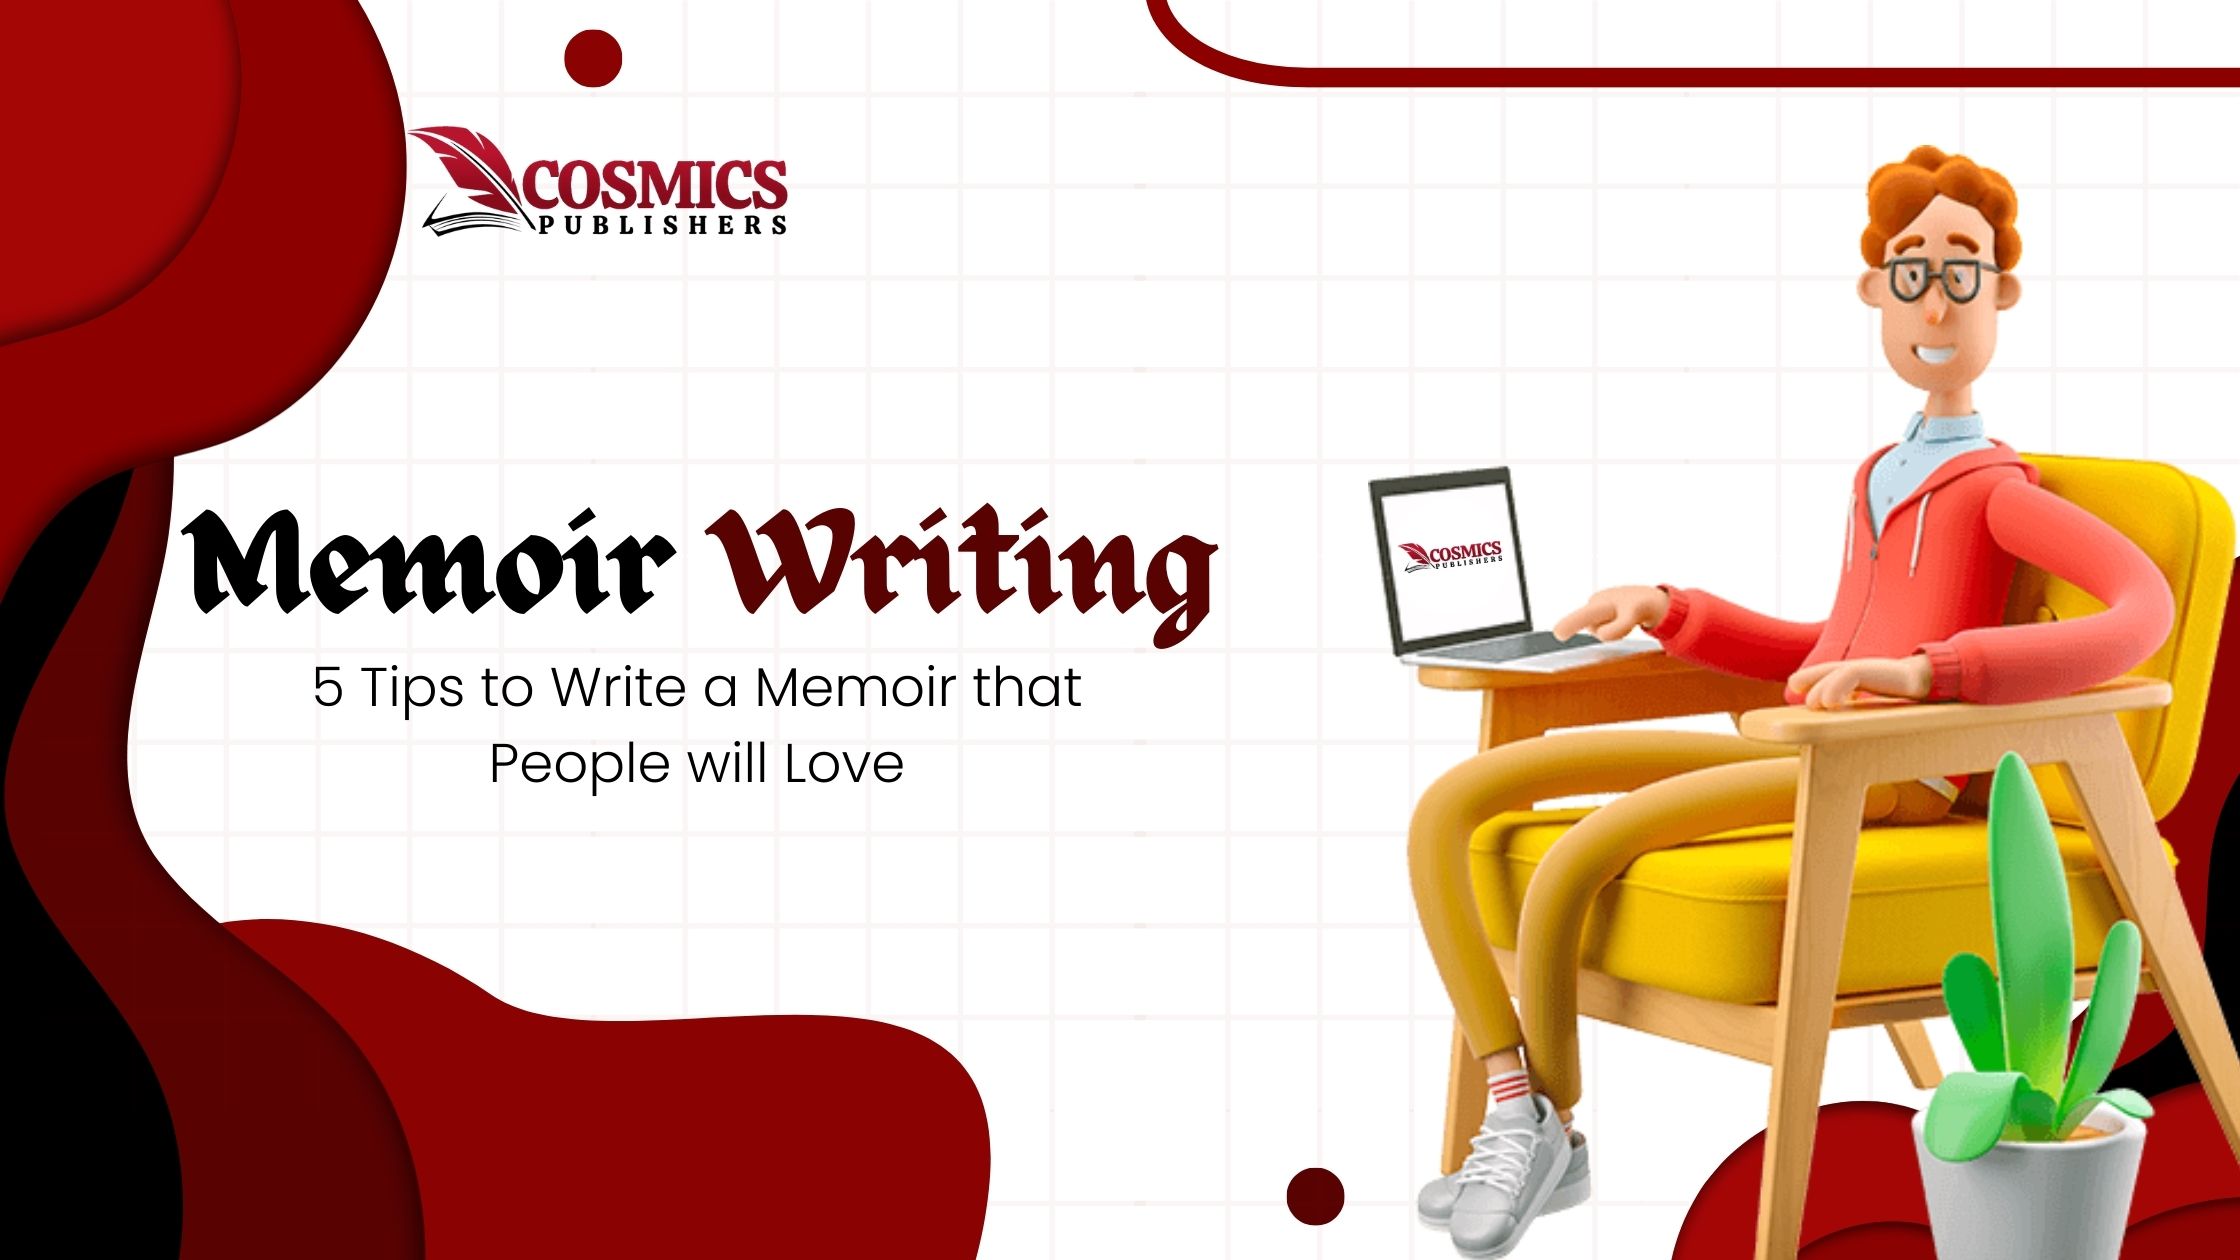 5 Tips to Write a Memoir that People will Love